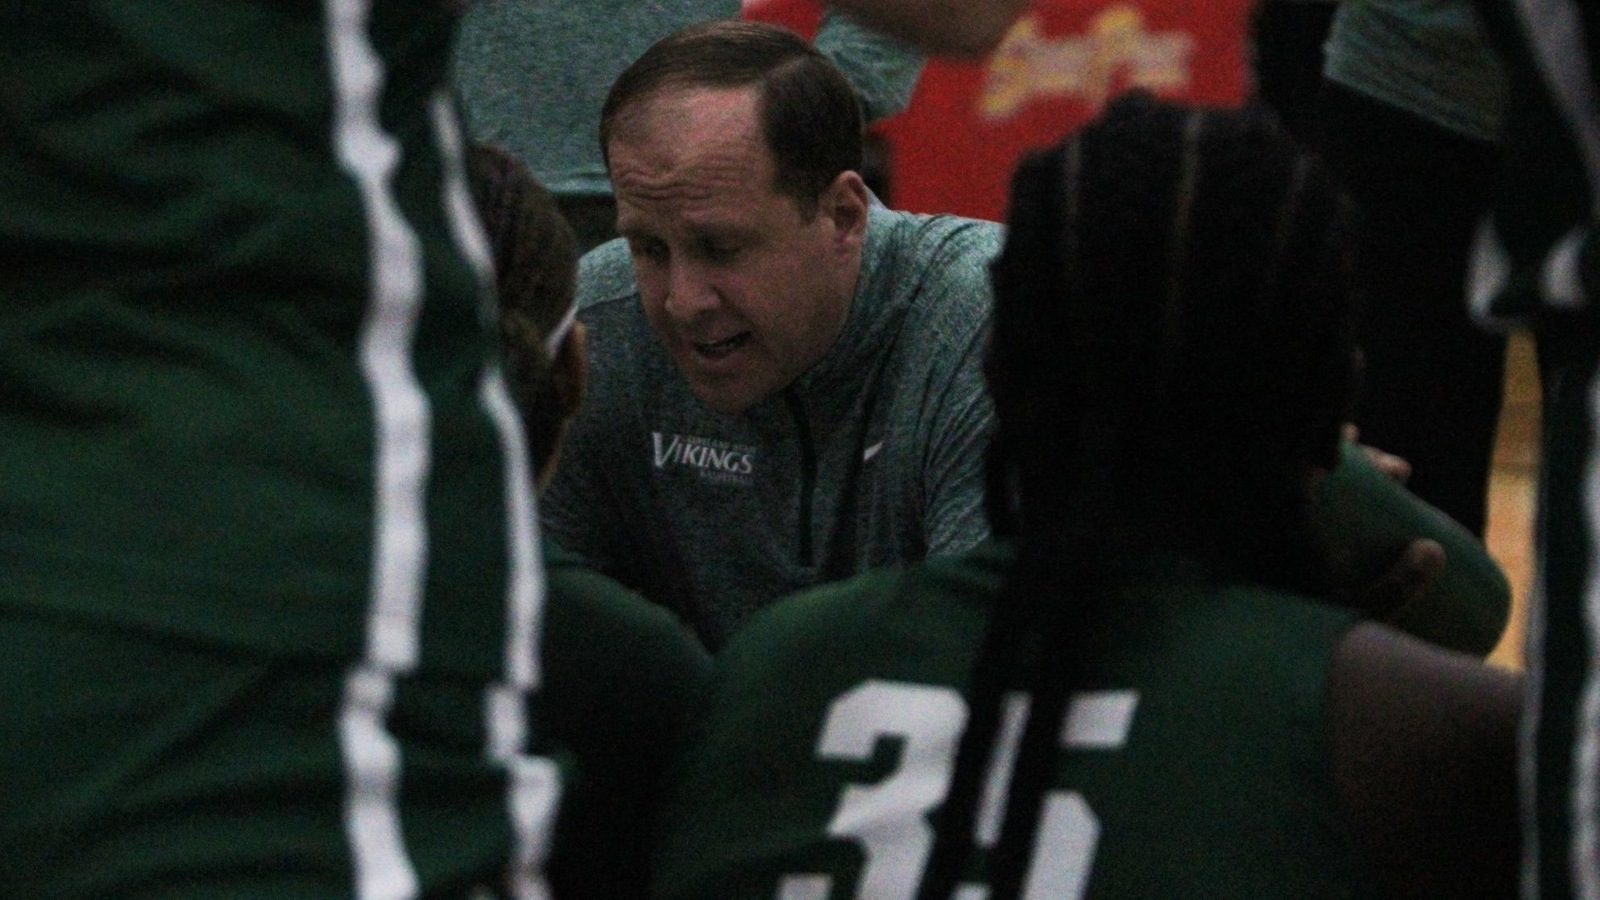 Cleveland State Women's Basketball Returns To #HLWBB Play With Thursday Night Matchup At YSU